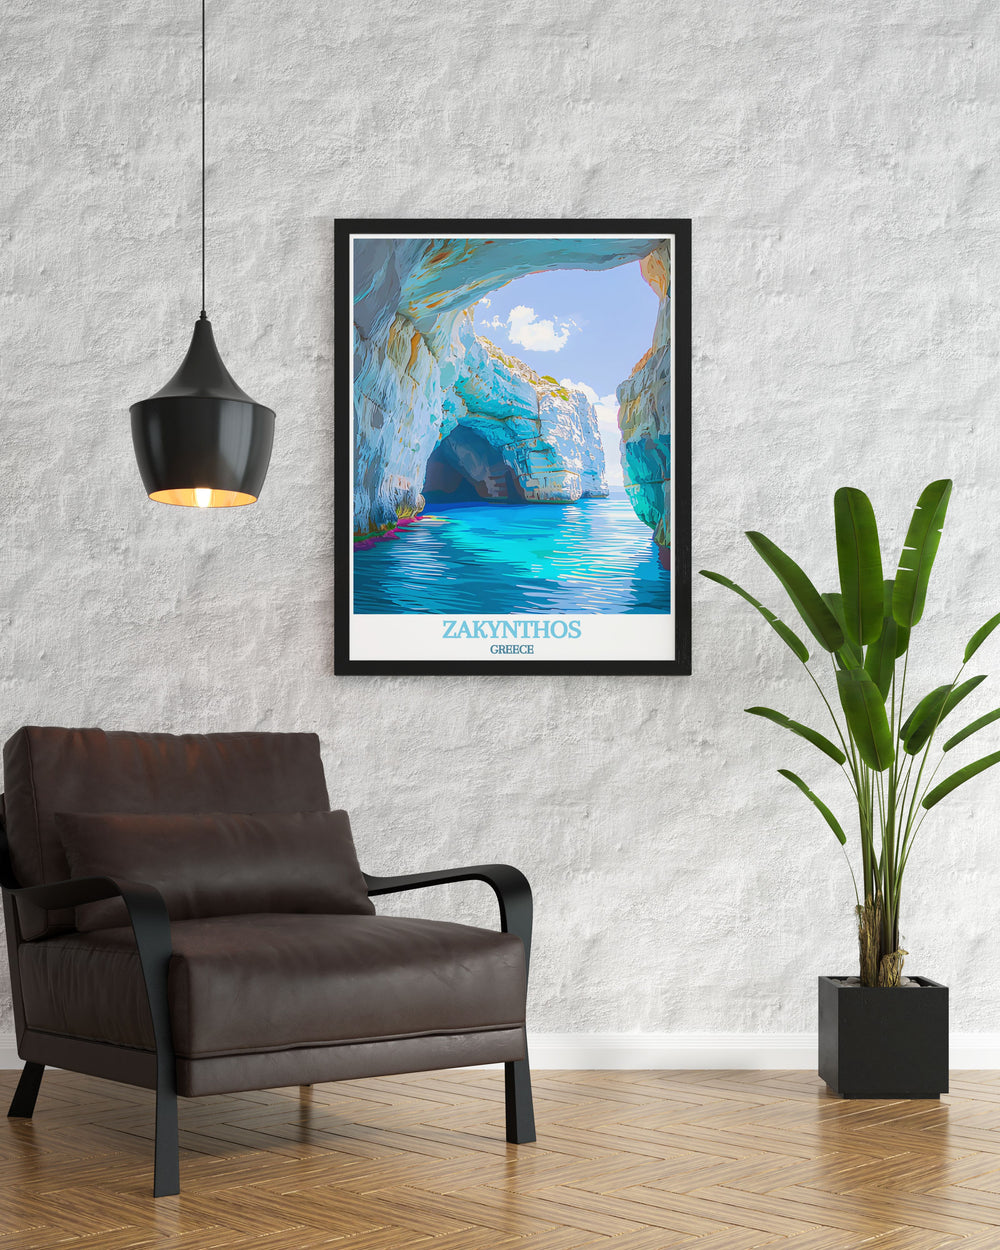 Zakynthos Wall Art featuring the vibrant life and rich history of Zakynthos Town with its quaint streets and lively atmosphere paired with the ethereal beauty of the Blue Caves perfect for adding a touch of Greece to any space